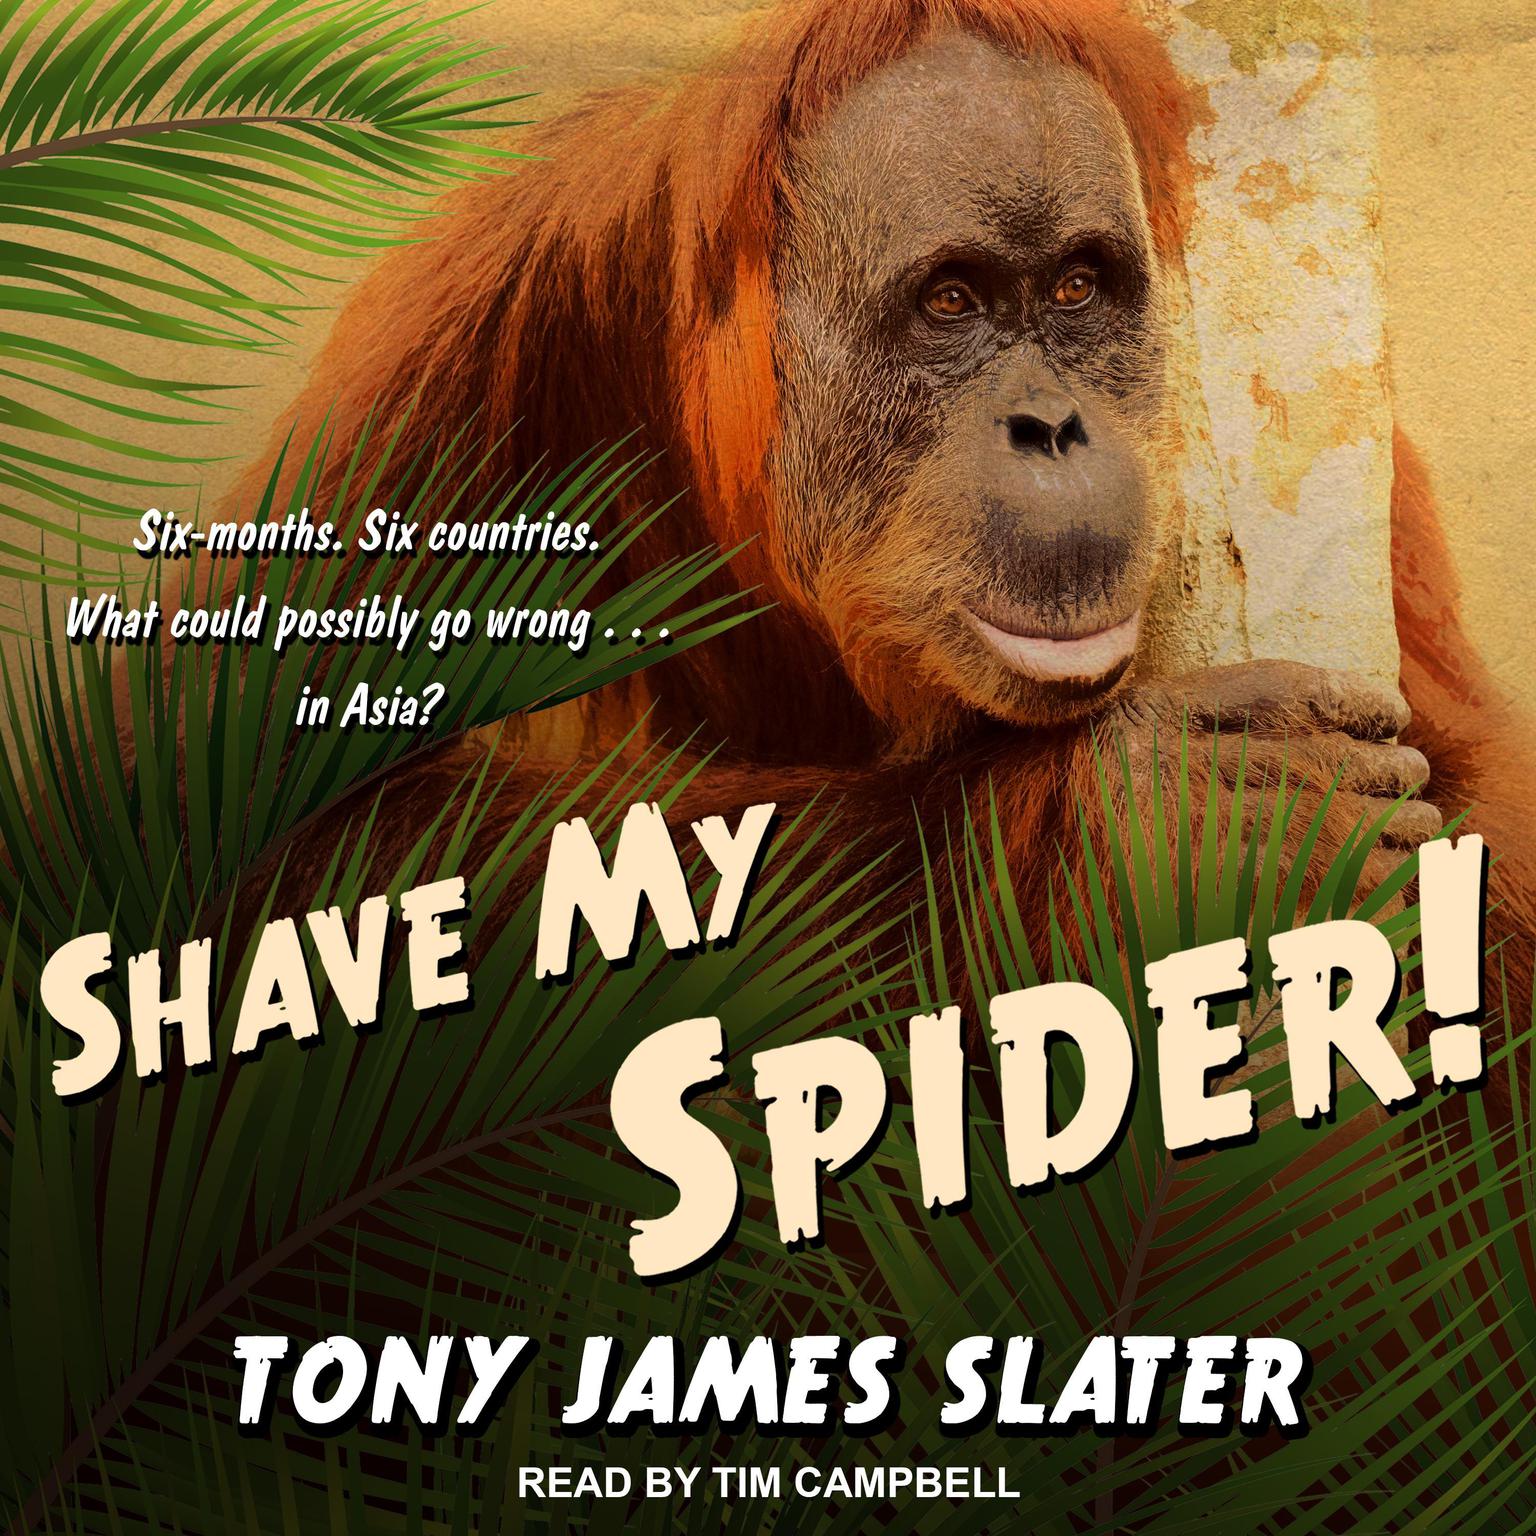 Shave My Spider!: A six-month adventure around Borneo, Vietnam, Mongolia, China, Laos and Cambodia Audiobook, by Tony James Slater